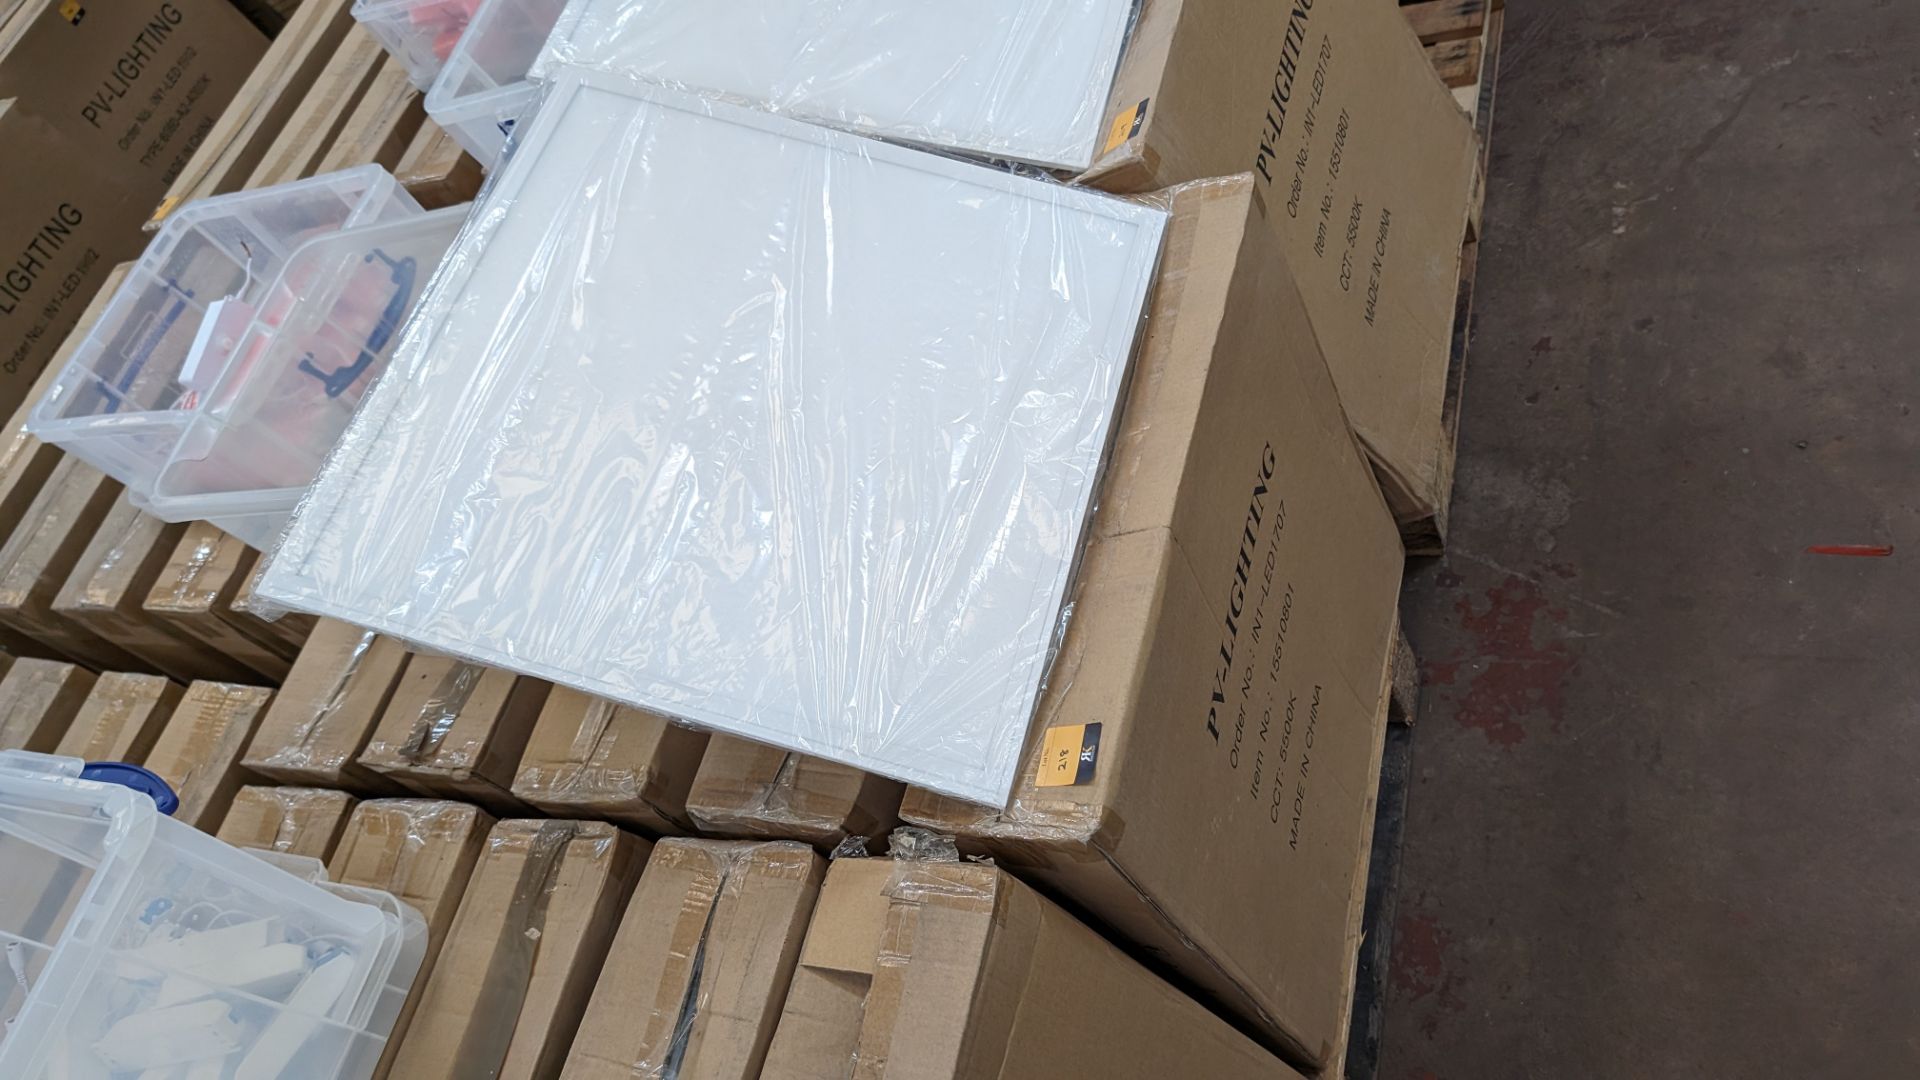 20 off 595mm x 595mm 32/36w 5500k 4320 lumens cold white LED lighting panels. This lot comprises 5 - Image 2 of 7